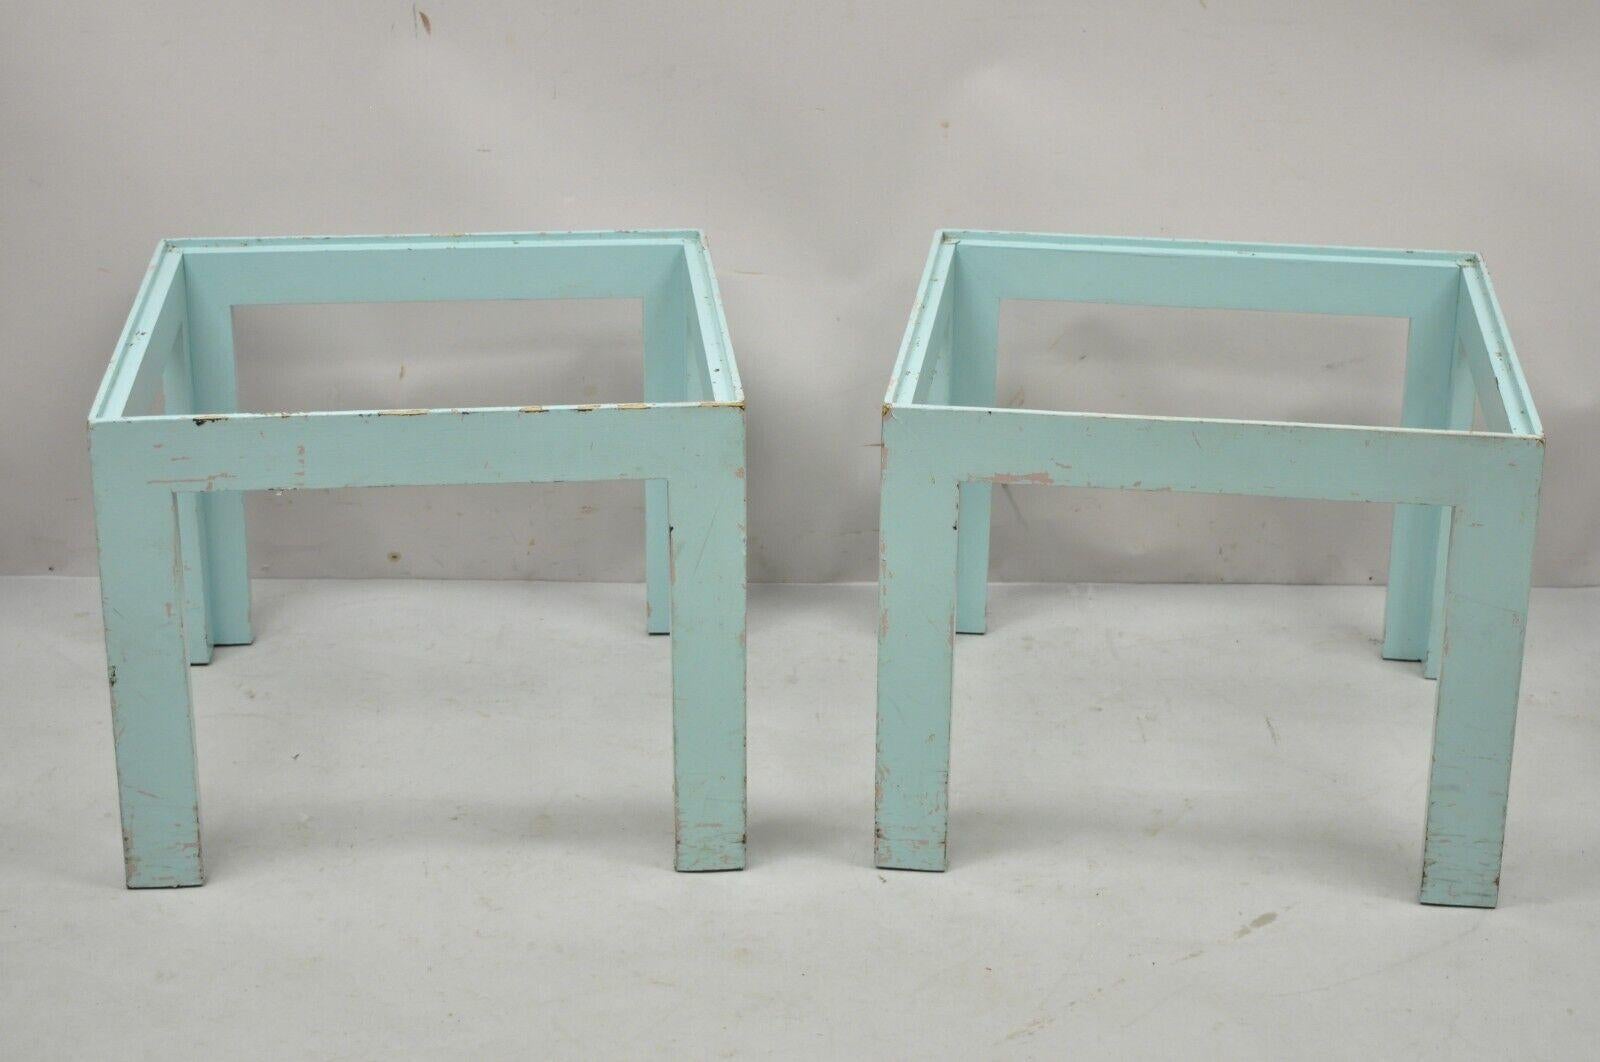 Vintage Mid-Century Modern wooden low side end table blue paint - a pair. Item features solid wood frame, distressed finish, very nice vintage set, clean modernist lines, no tops. Circa mid 20th Century. Measurements: 15